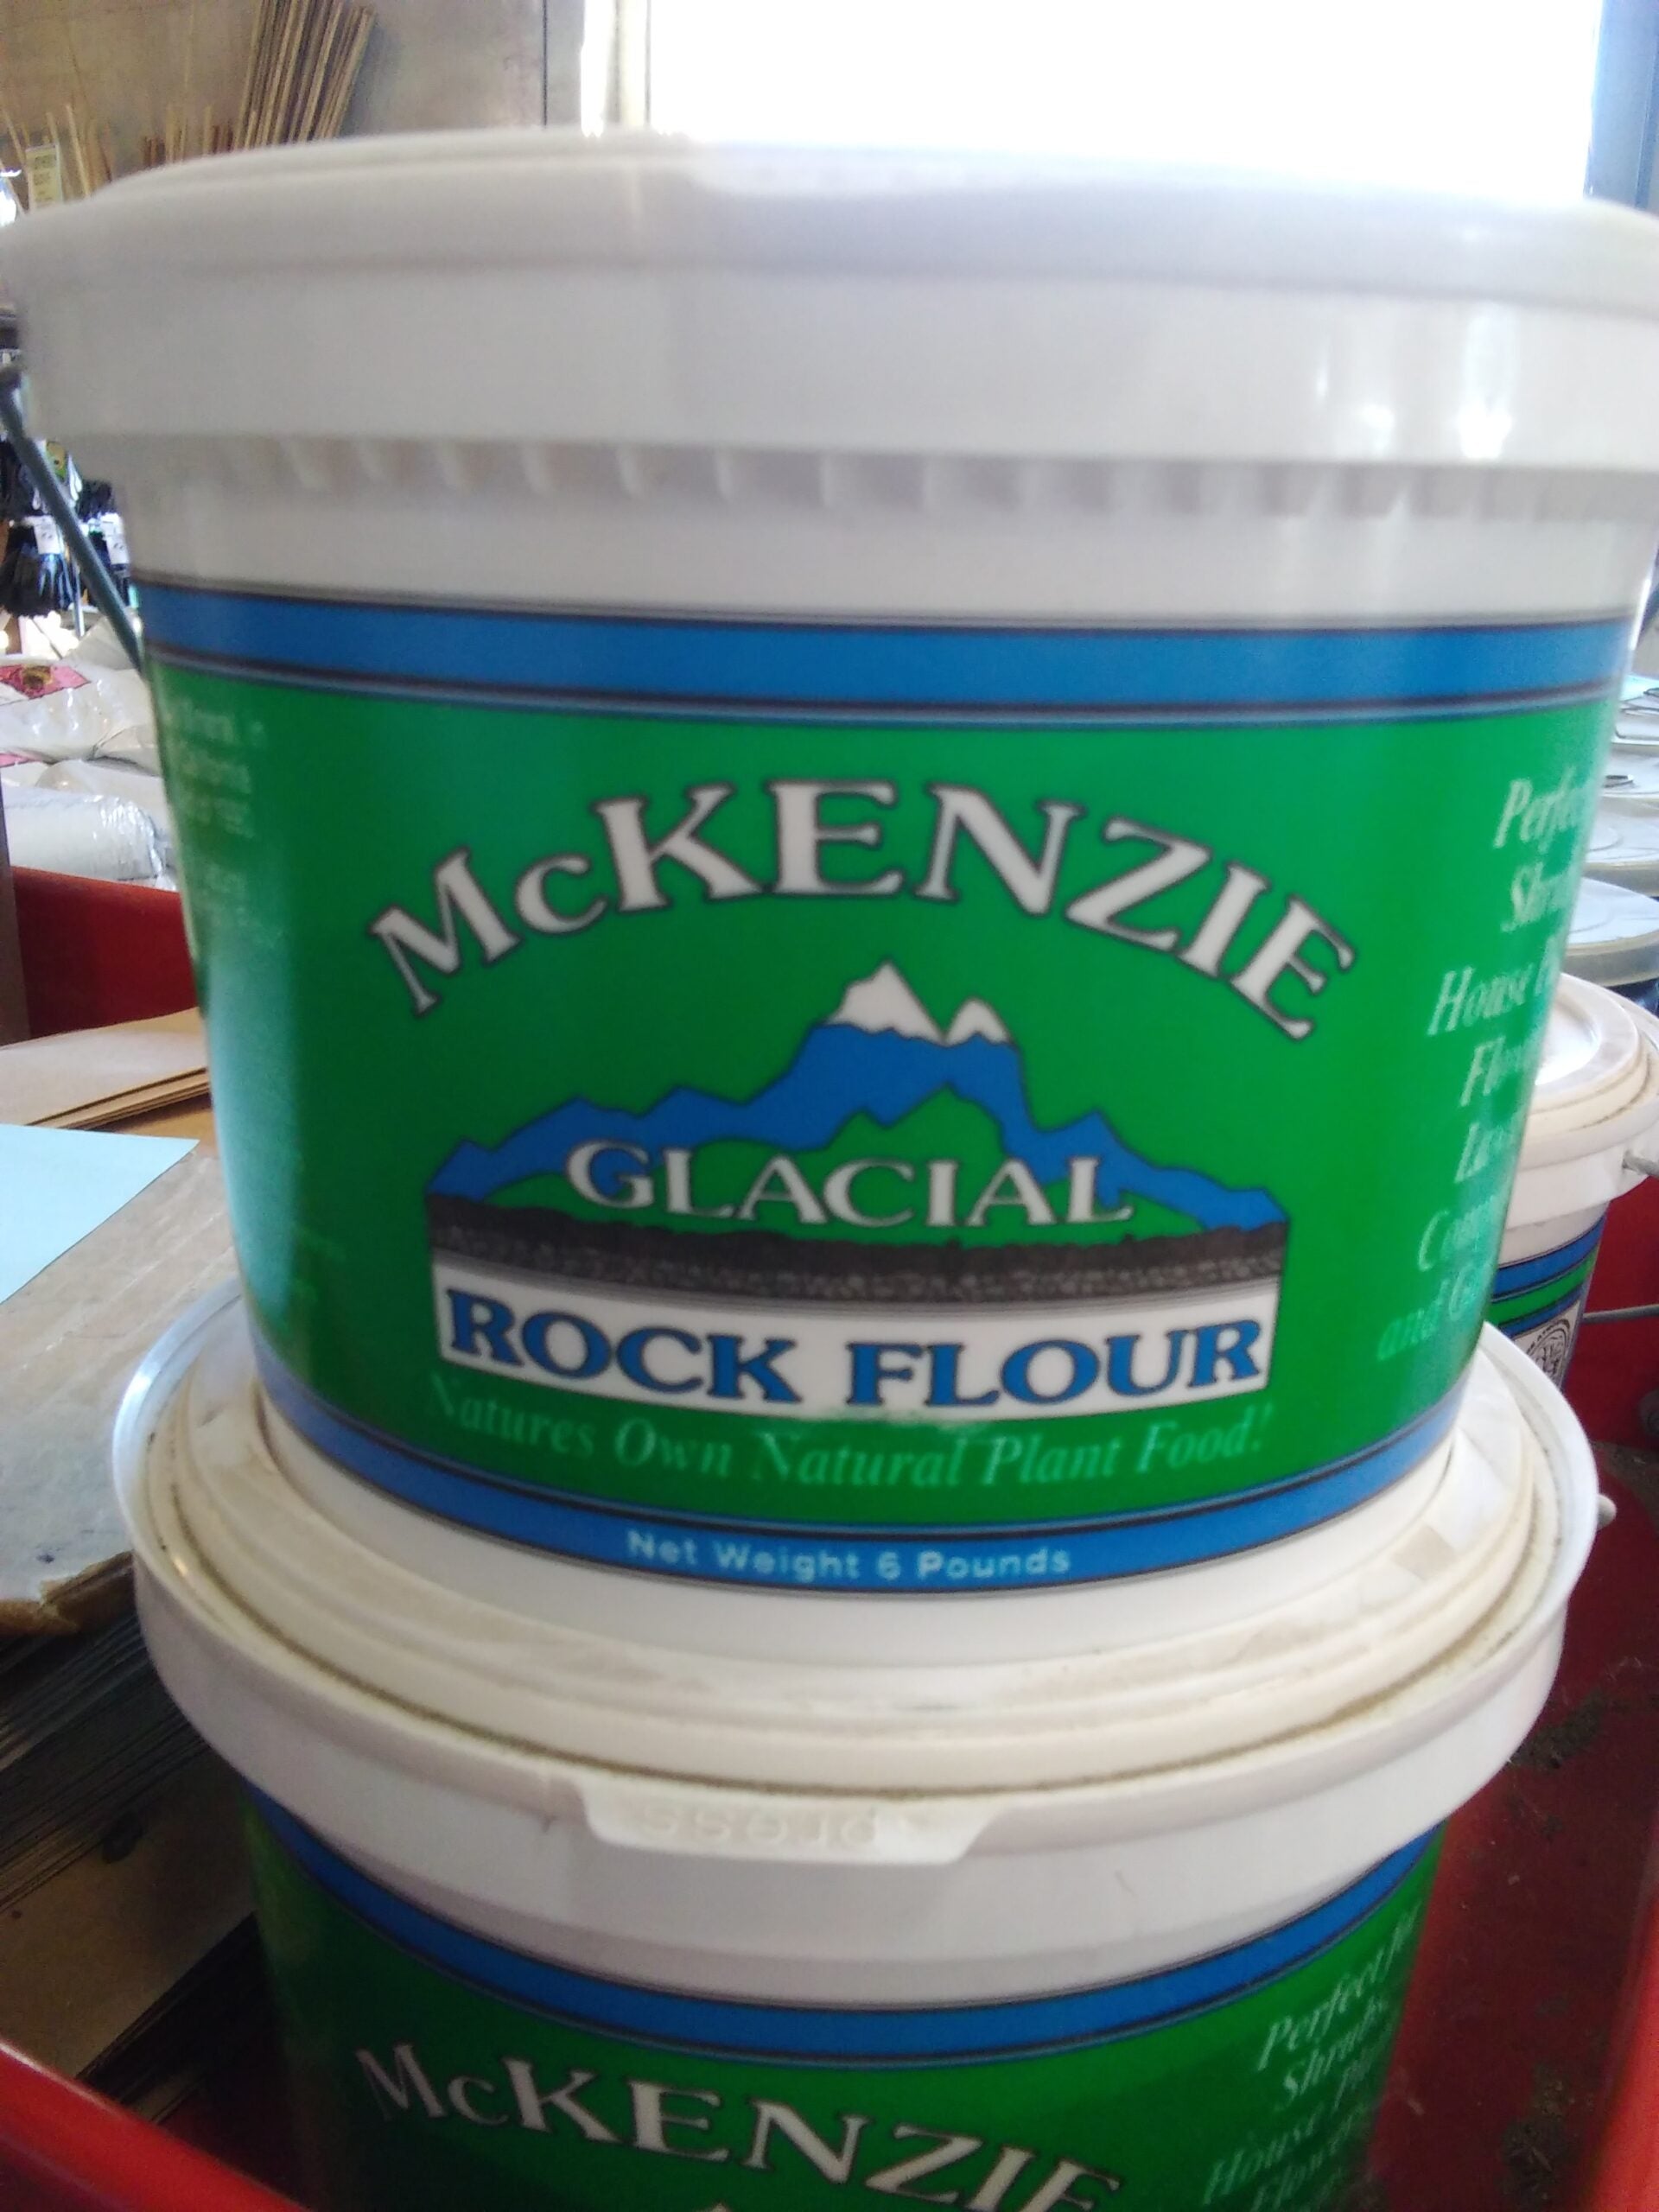 White containers with a green and blue label. There is an illustration of 2 mountain peaks.